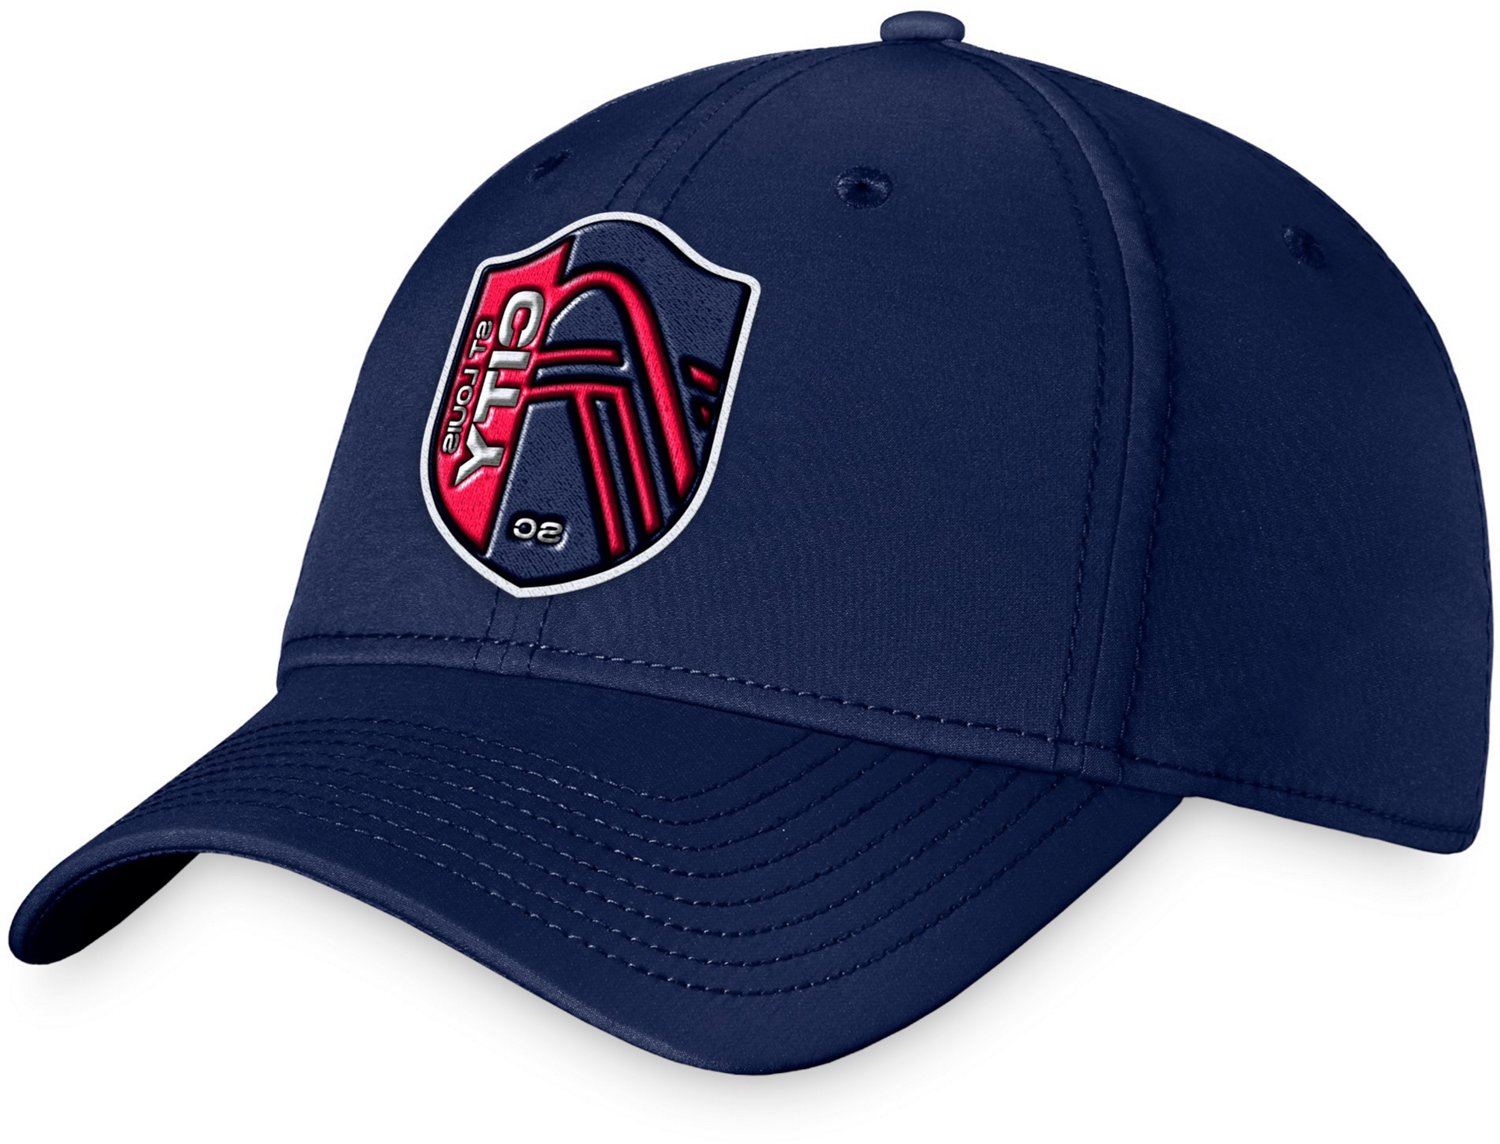 St. Louis City SC Adults' Structured Stretch Cap | Academy